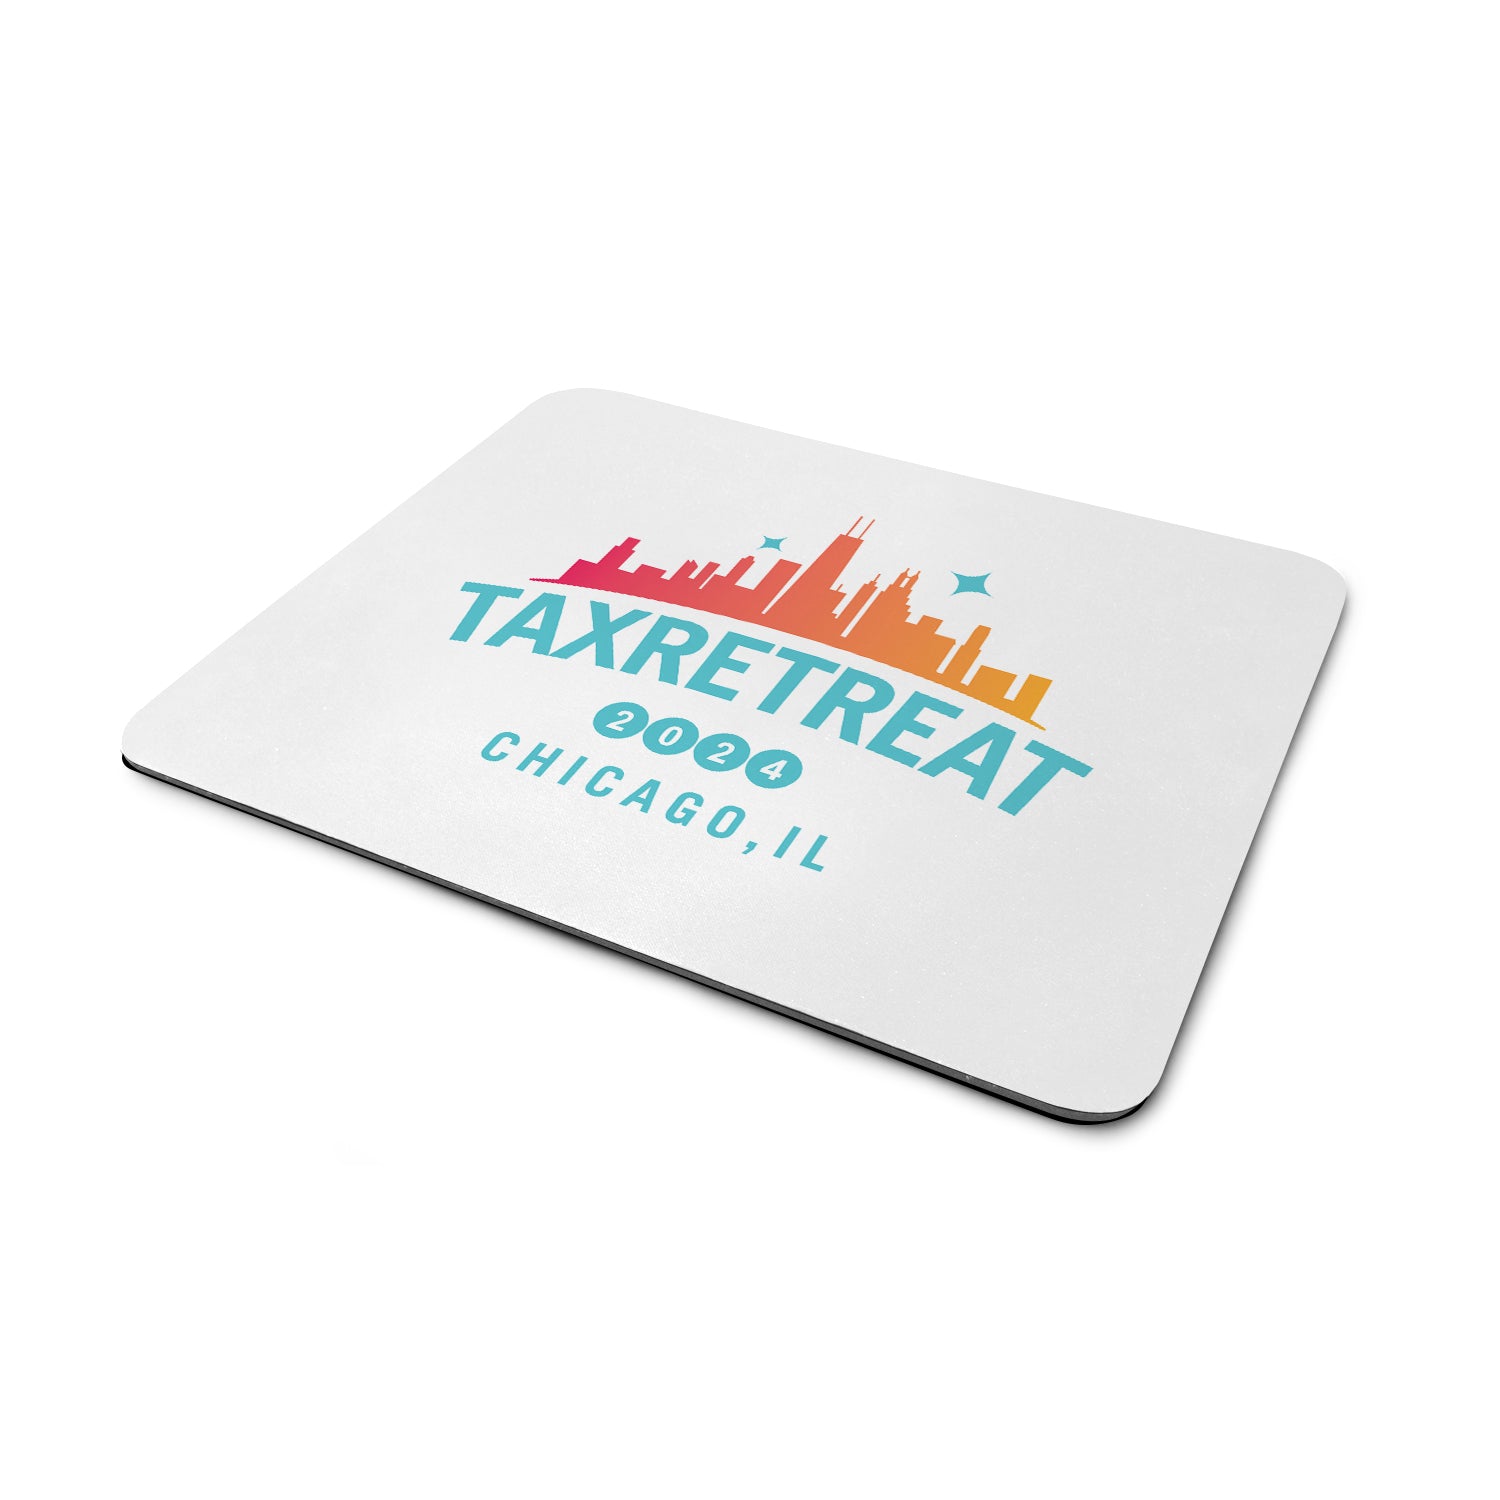 Tax Retreat Chicago 2024 Mouse Pad